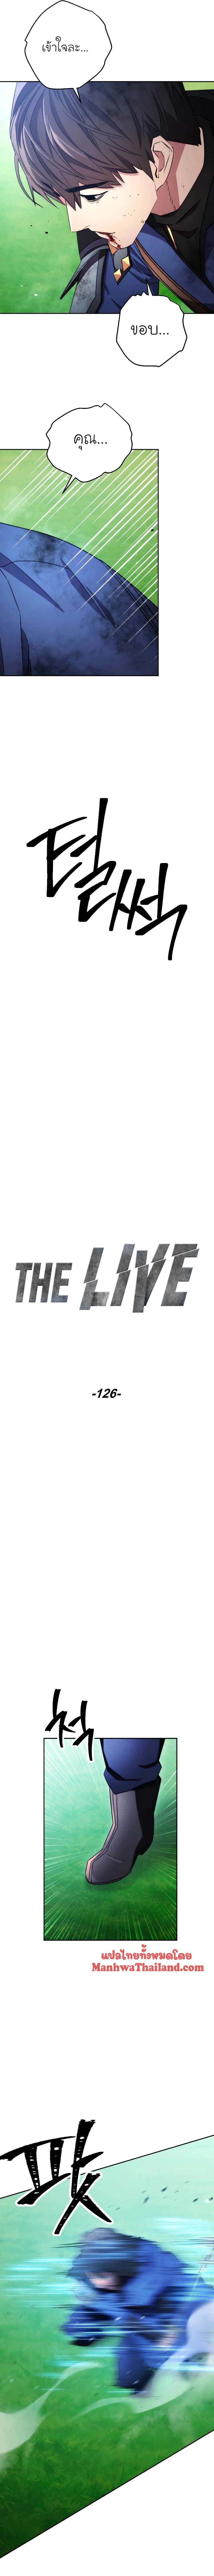 The Live 126 (5)